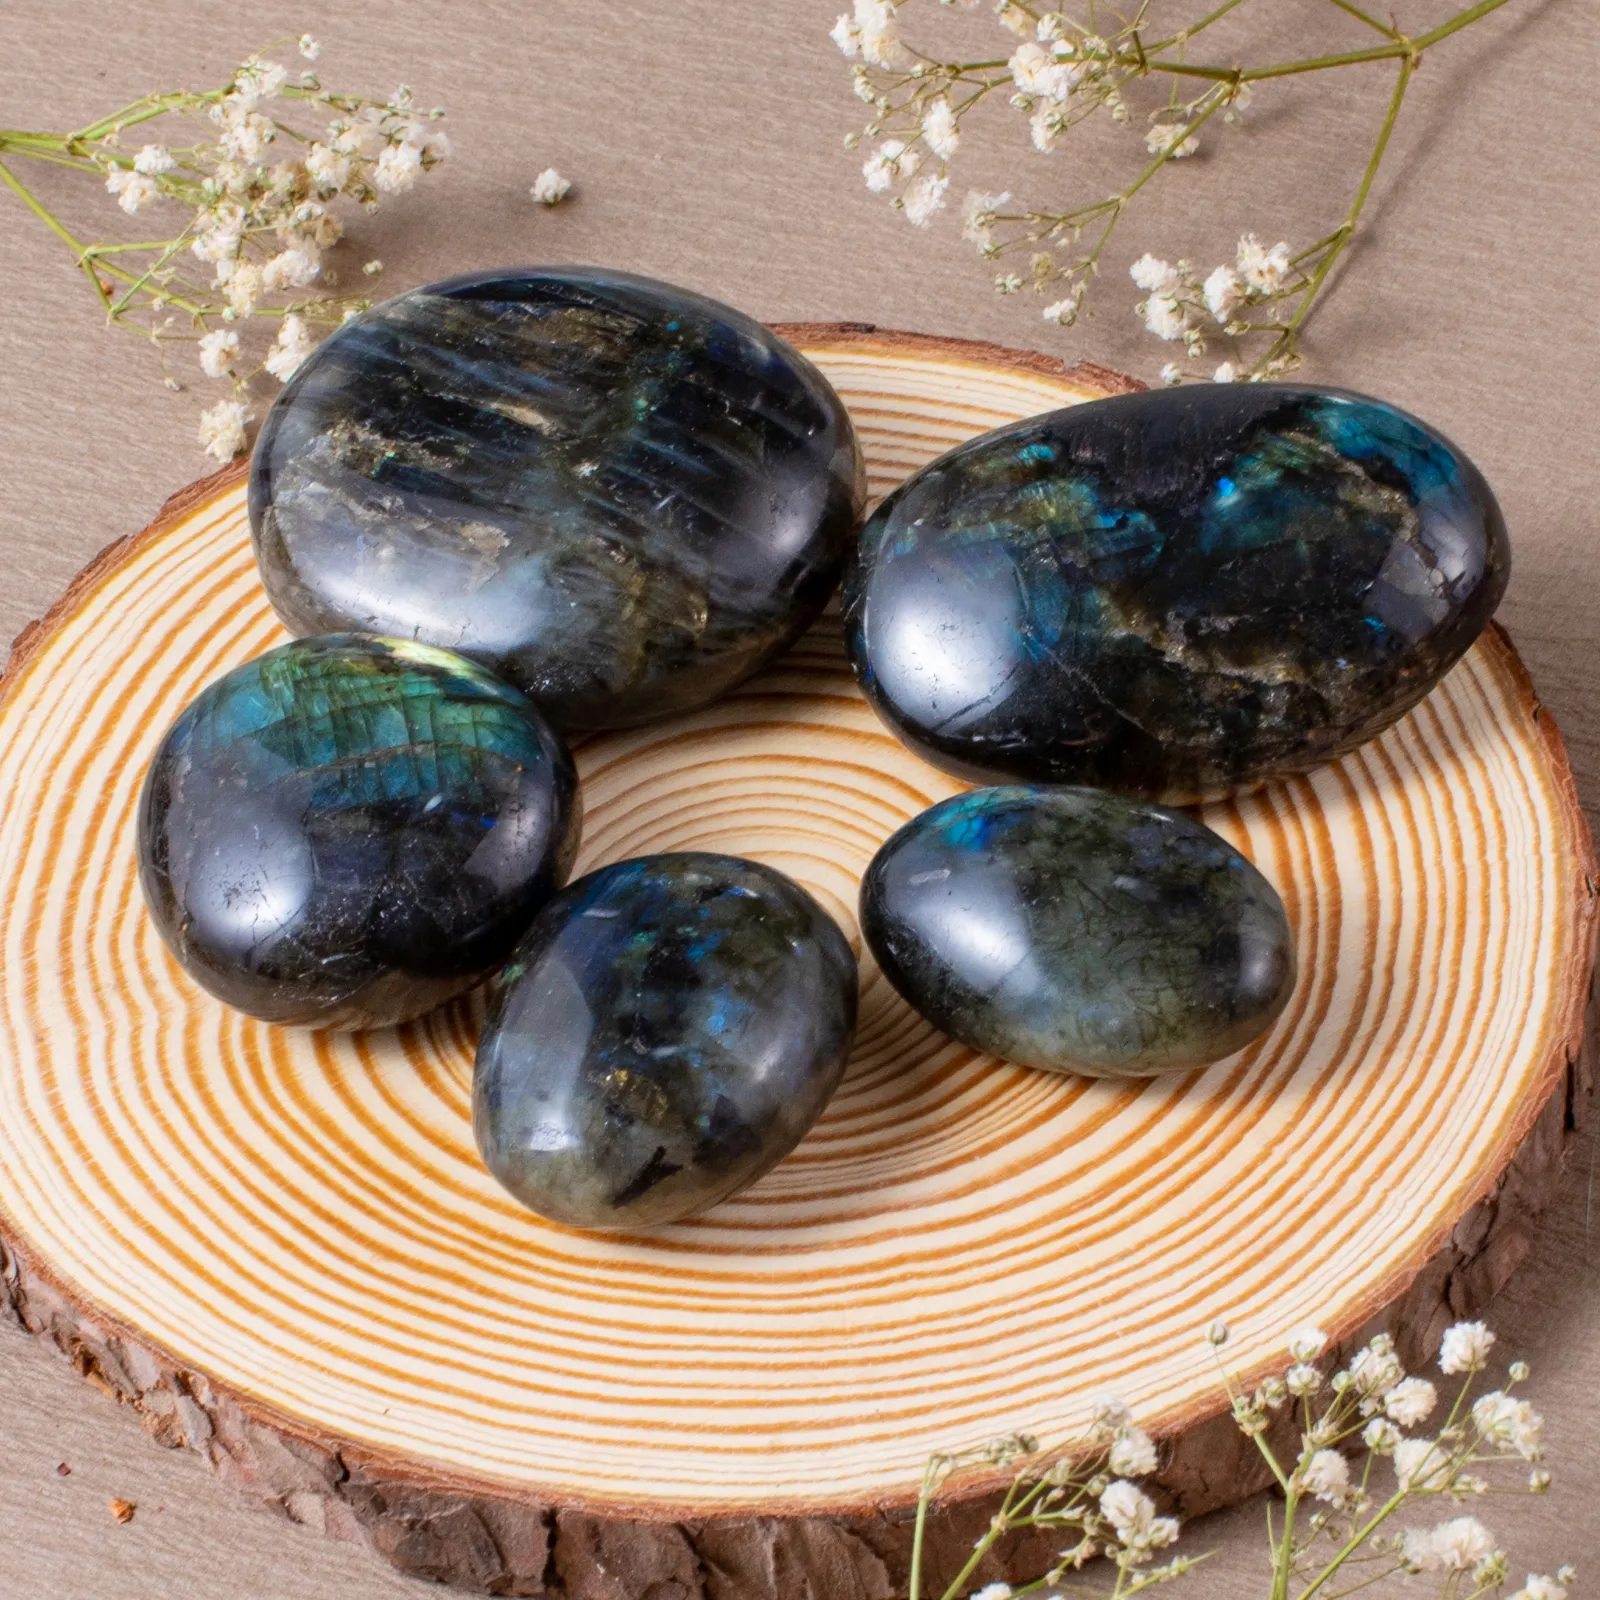 Natural Labradorite Palm Stone Crystal Stone Soap Shaped Pockets Polished Used for Healing Energy Wicca Reiki Yoga Metaphysical